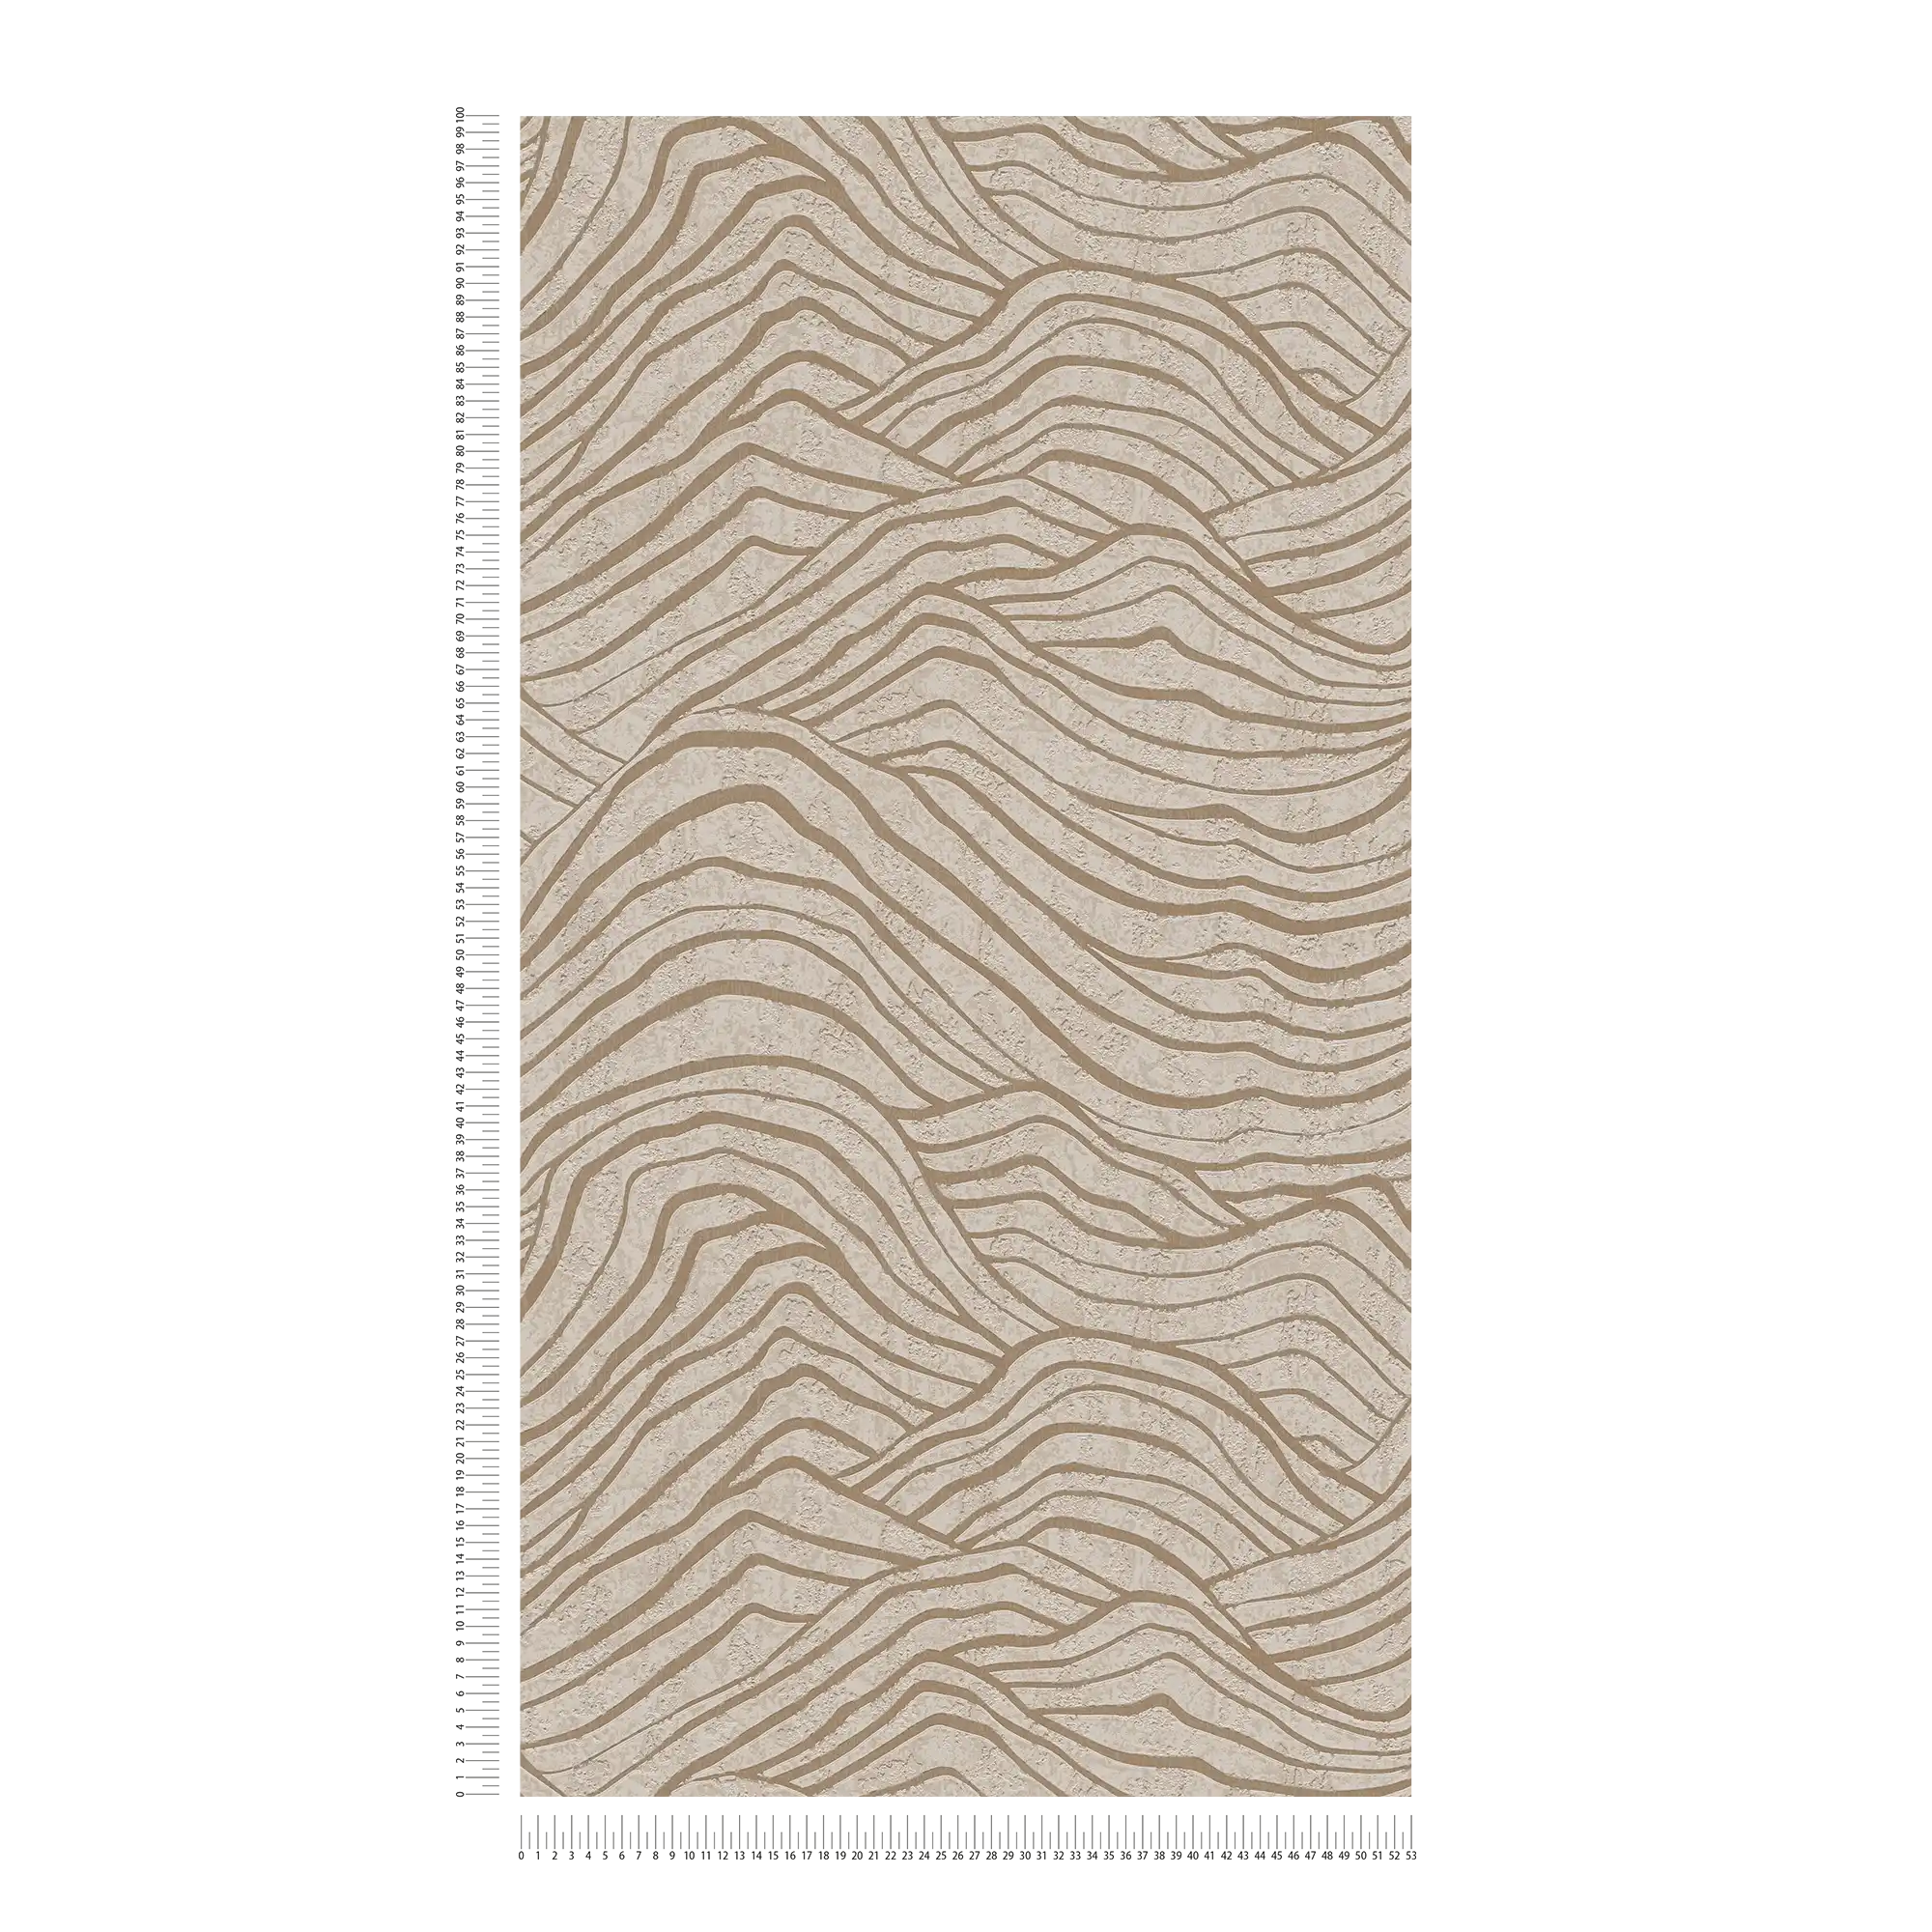             Wallpaper with Asian hill pattern - beige, gold, grey
        